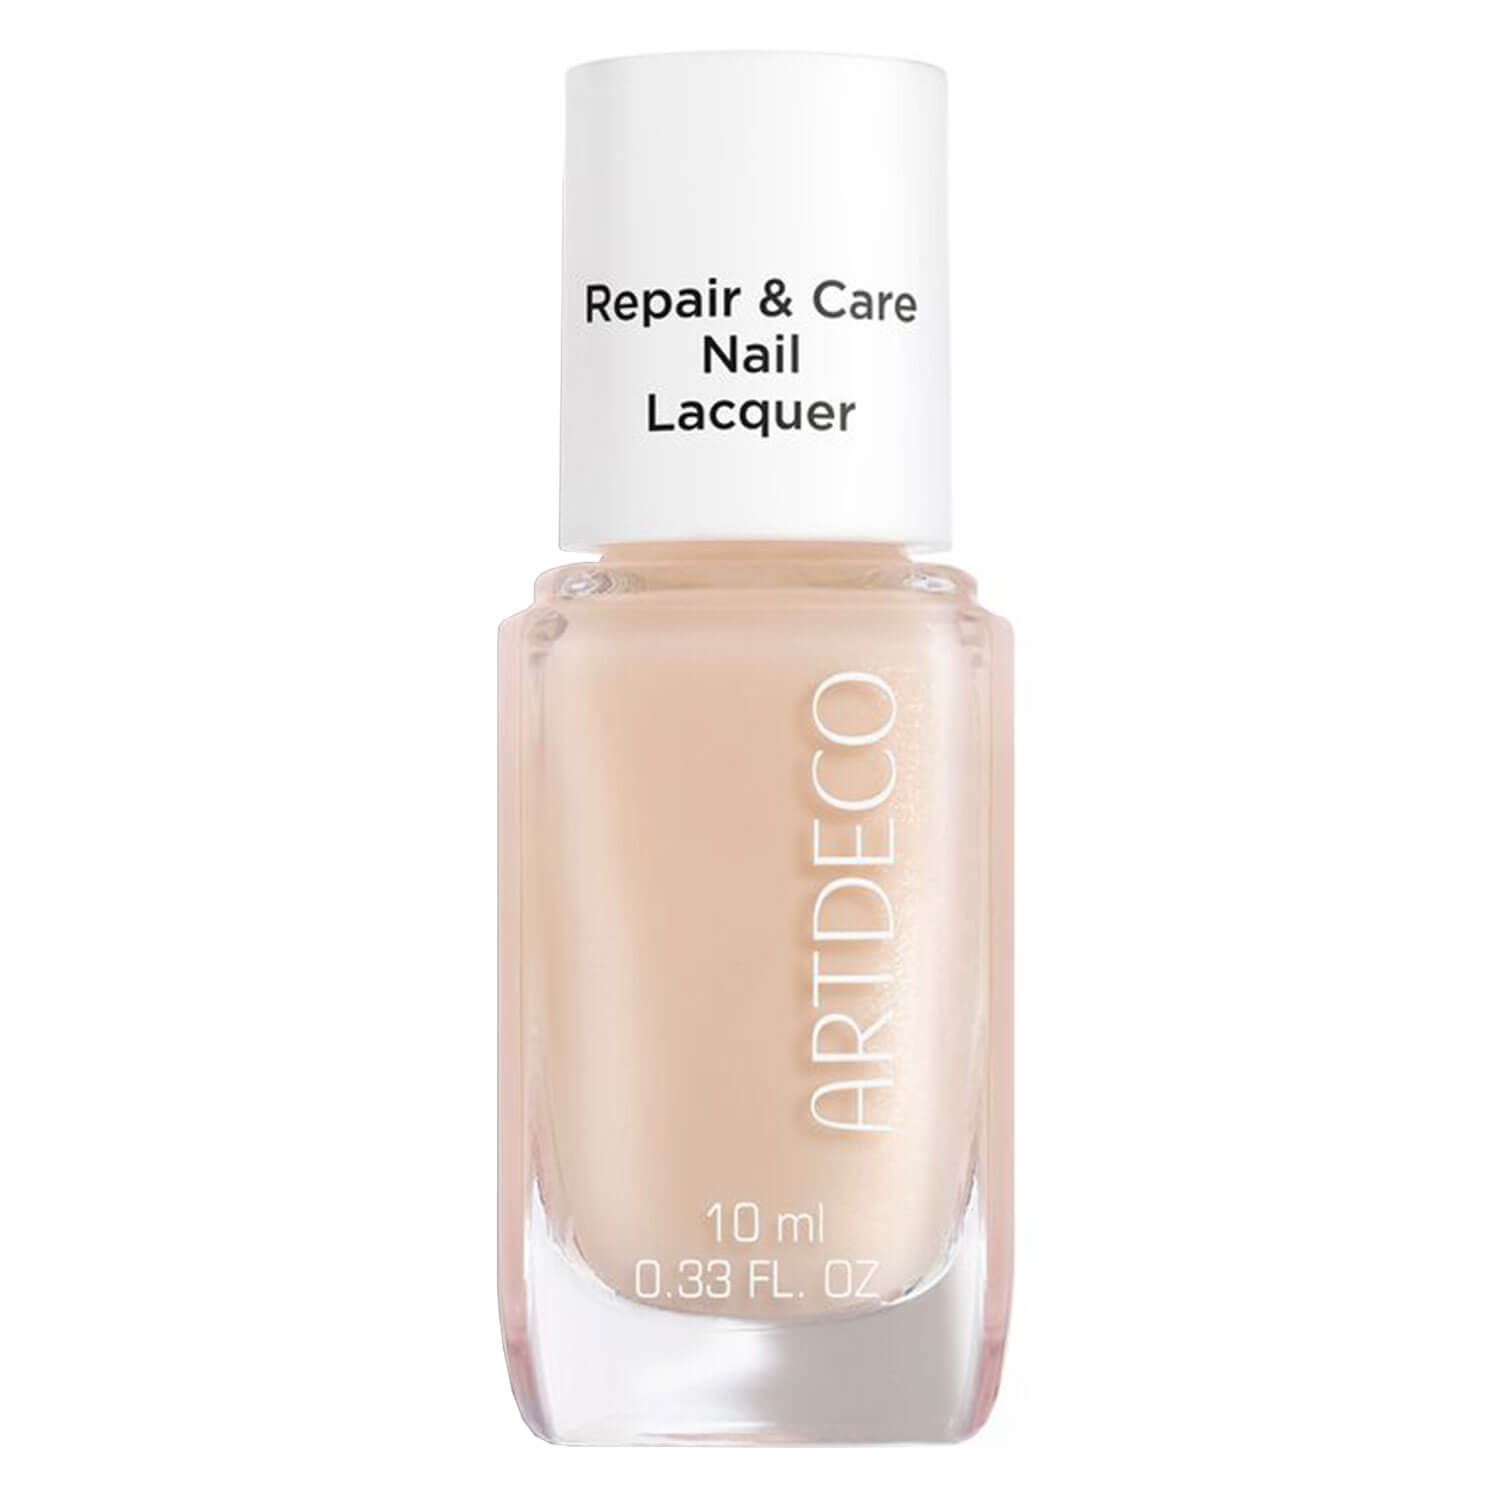 Product image from Artdeco Nail Care - Repair & Care Nail Lacquer